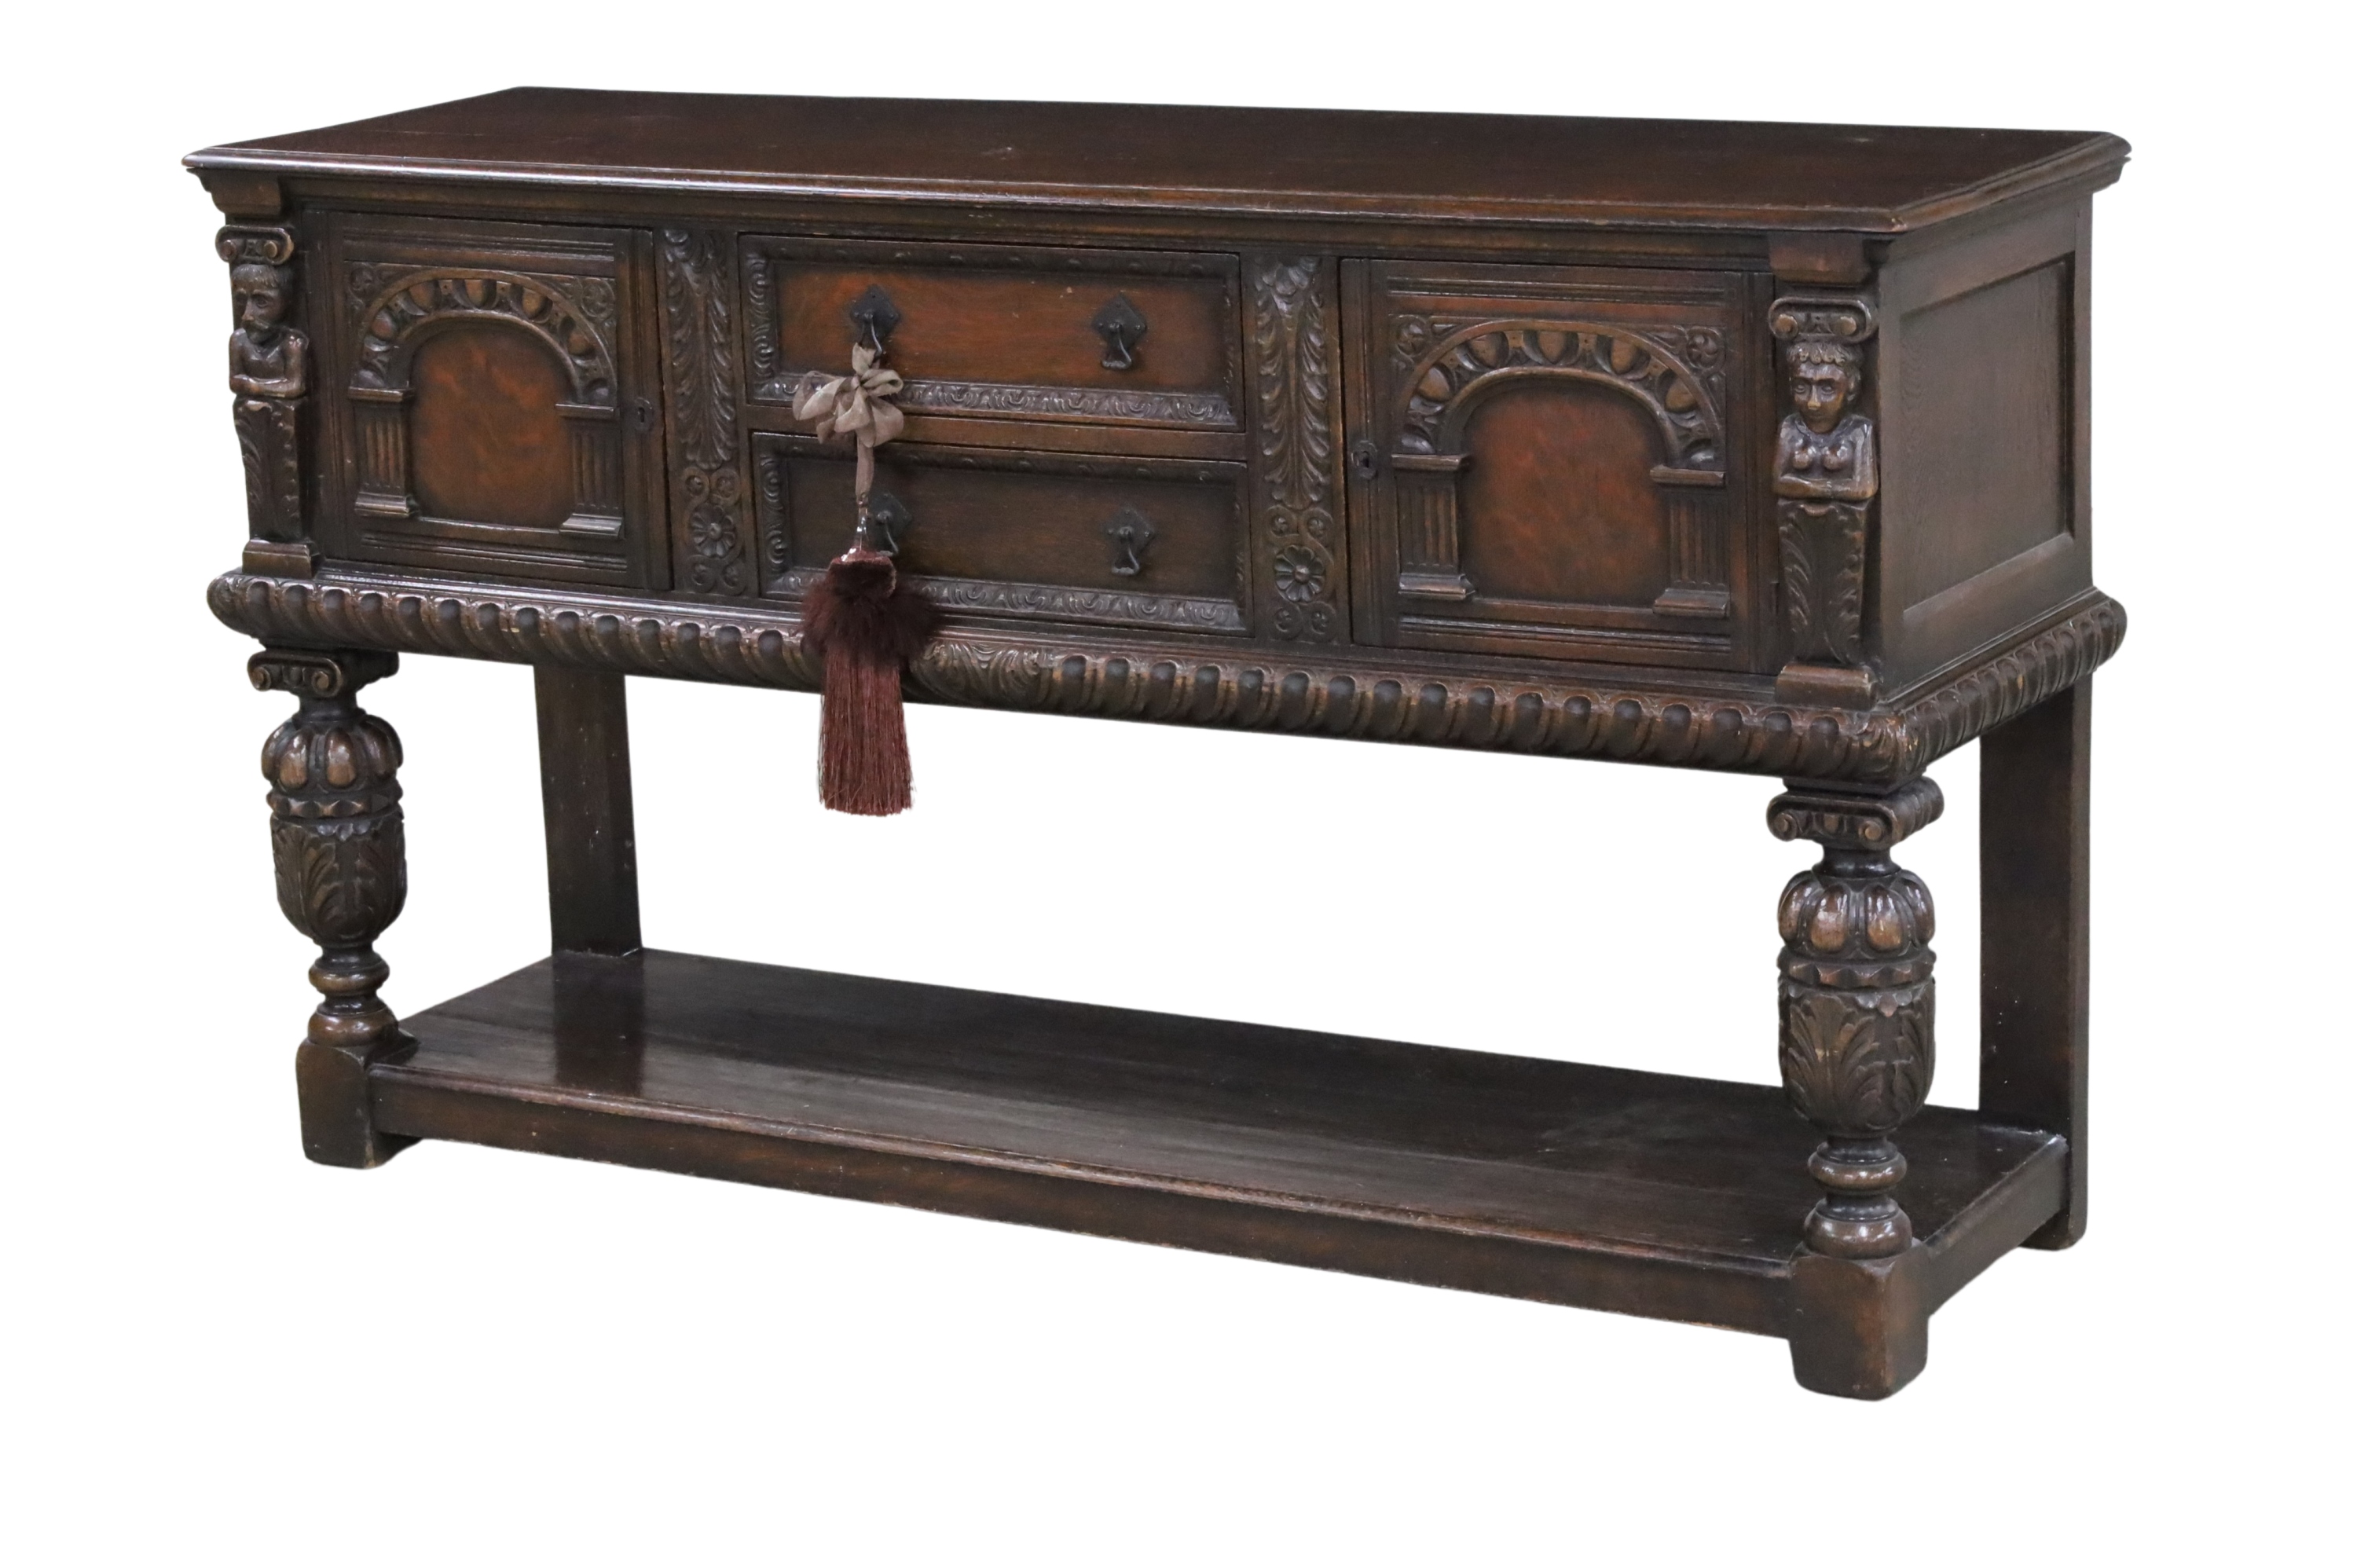 HANDSOME JACOBEAN STYLE OAK CARVED